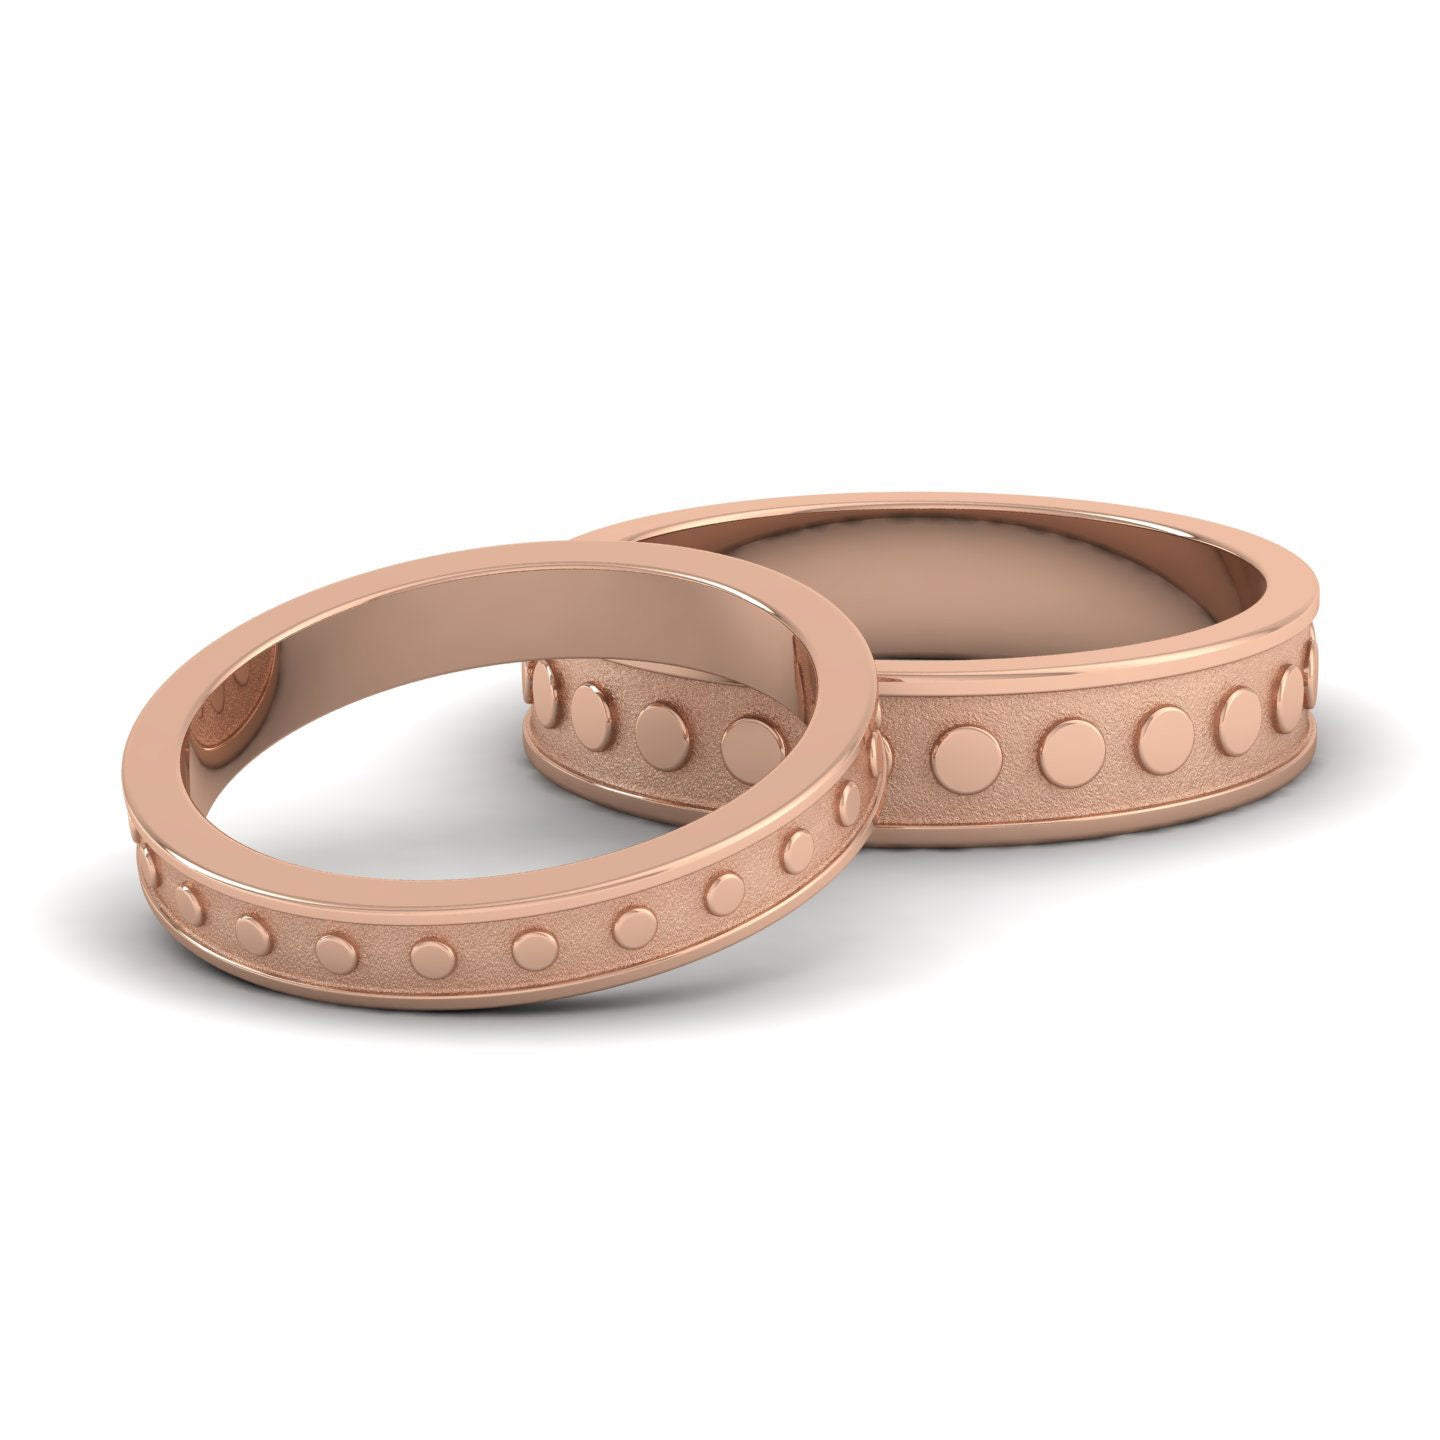 Raised Circle And Edge Patterned 18ct Rose Gold 5mm Wedding Ring